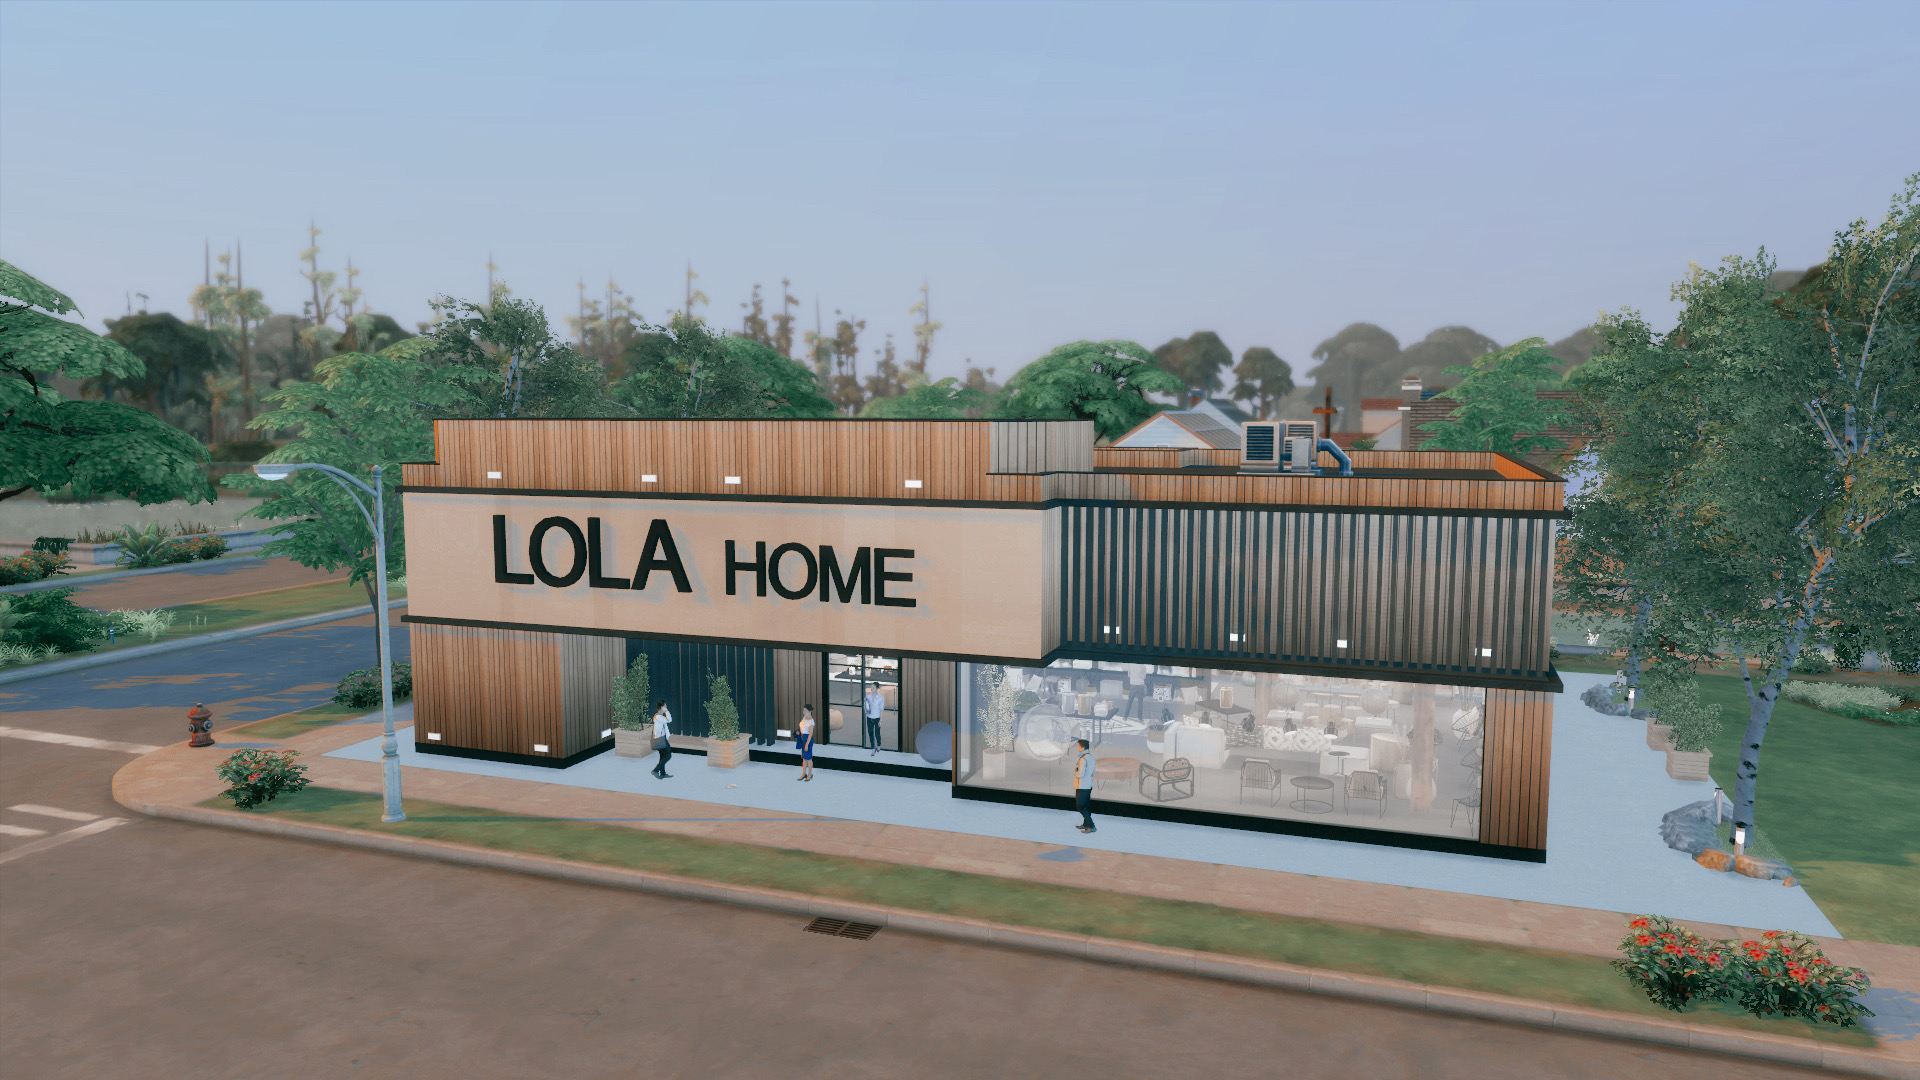 LOLA HOME STORE (PUBLIC PICTURES) by BOJDO Yakub from Patreon